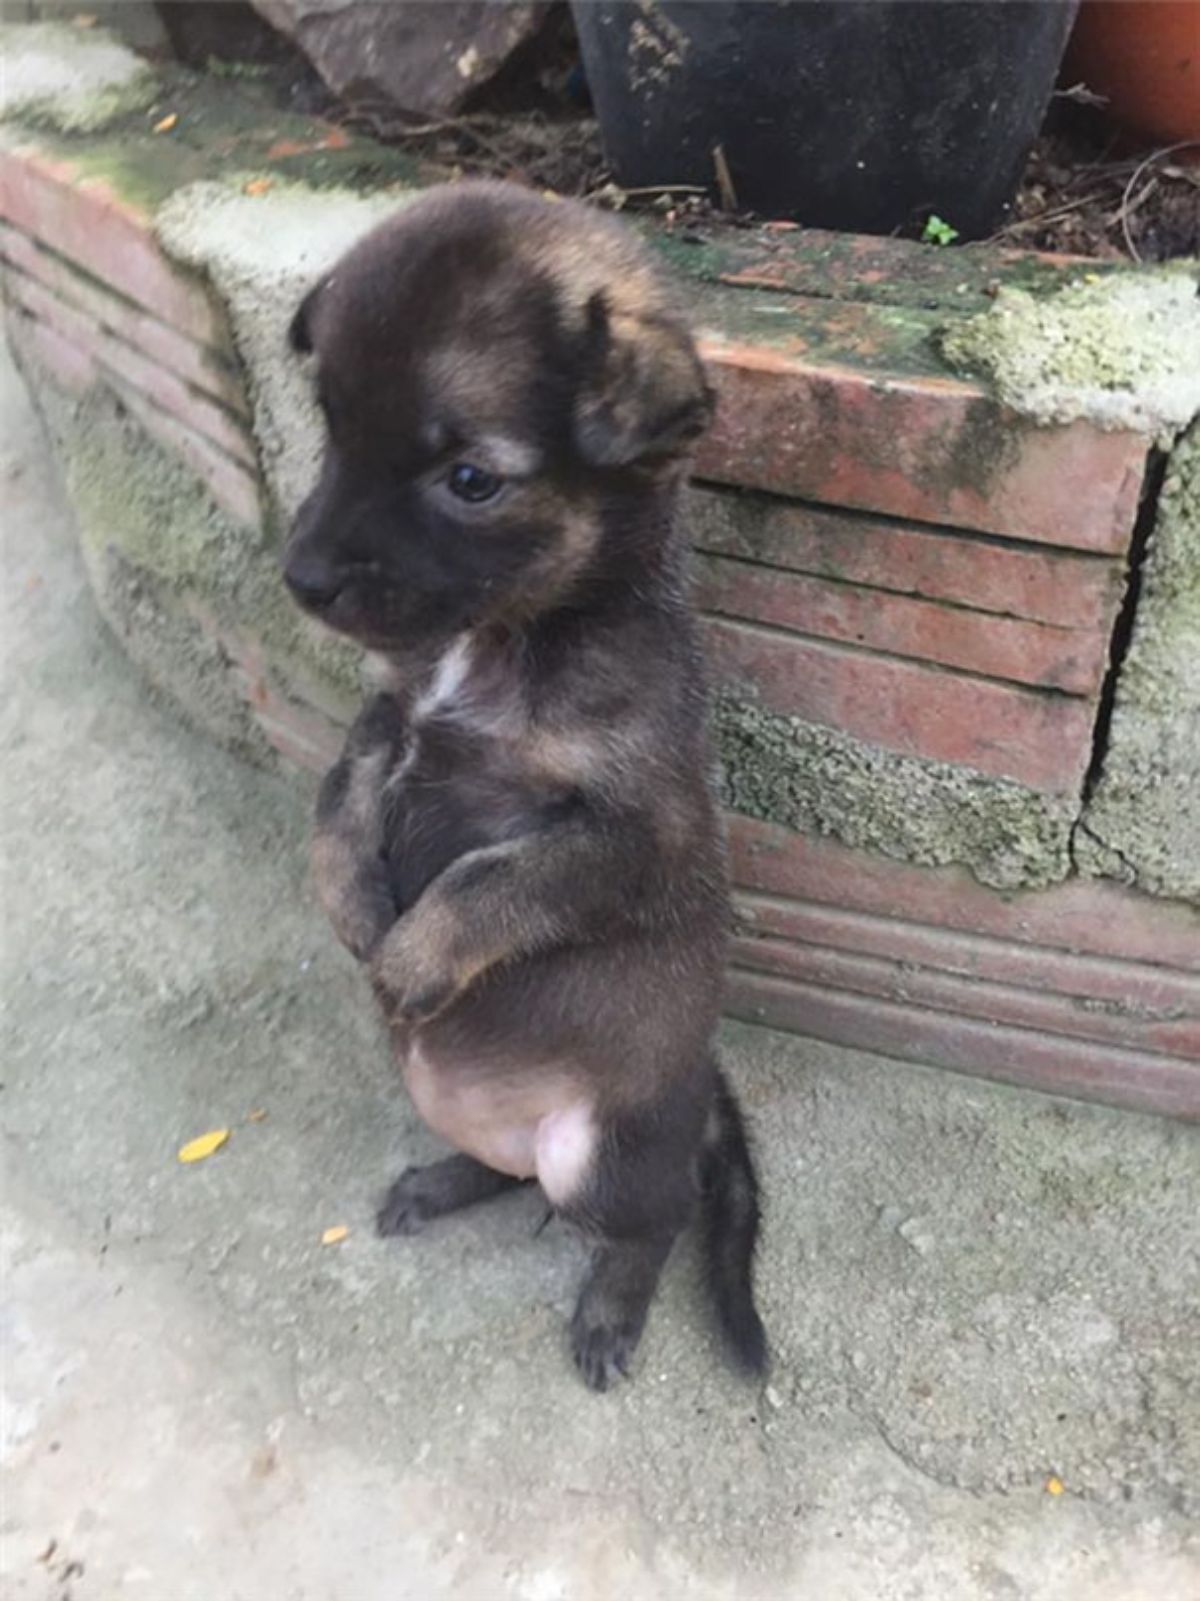 a black puppy standing up on its hind legs in a garden